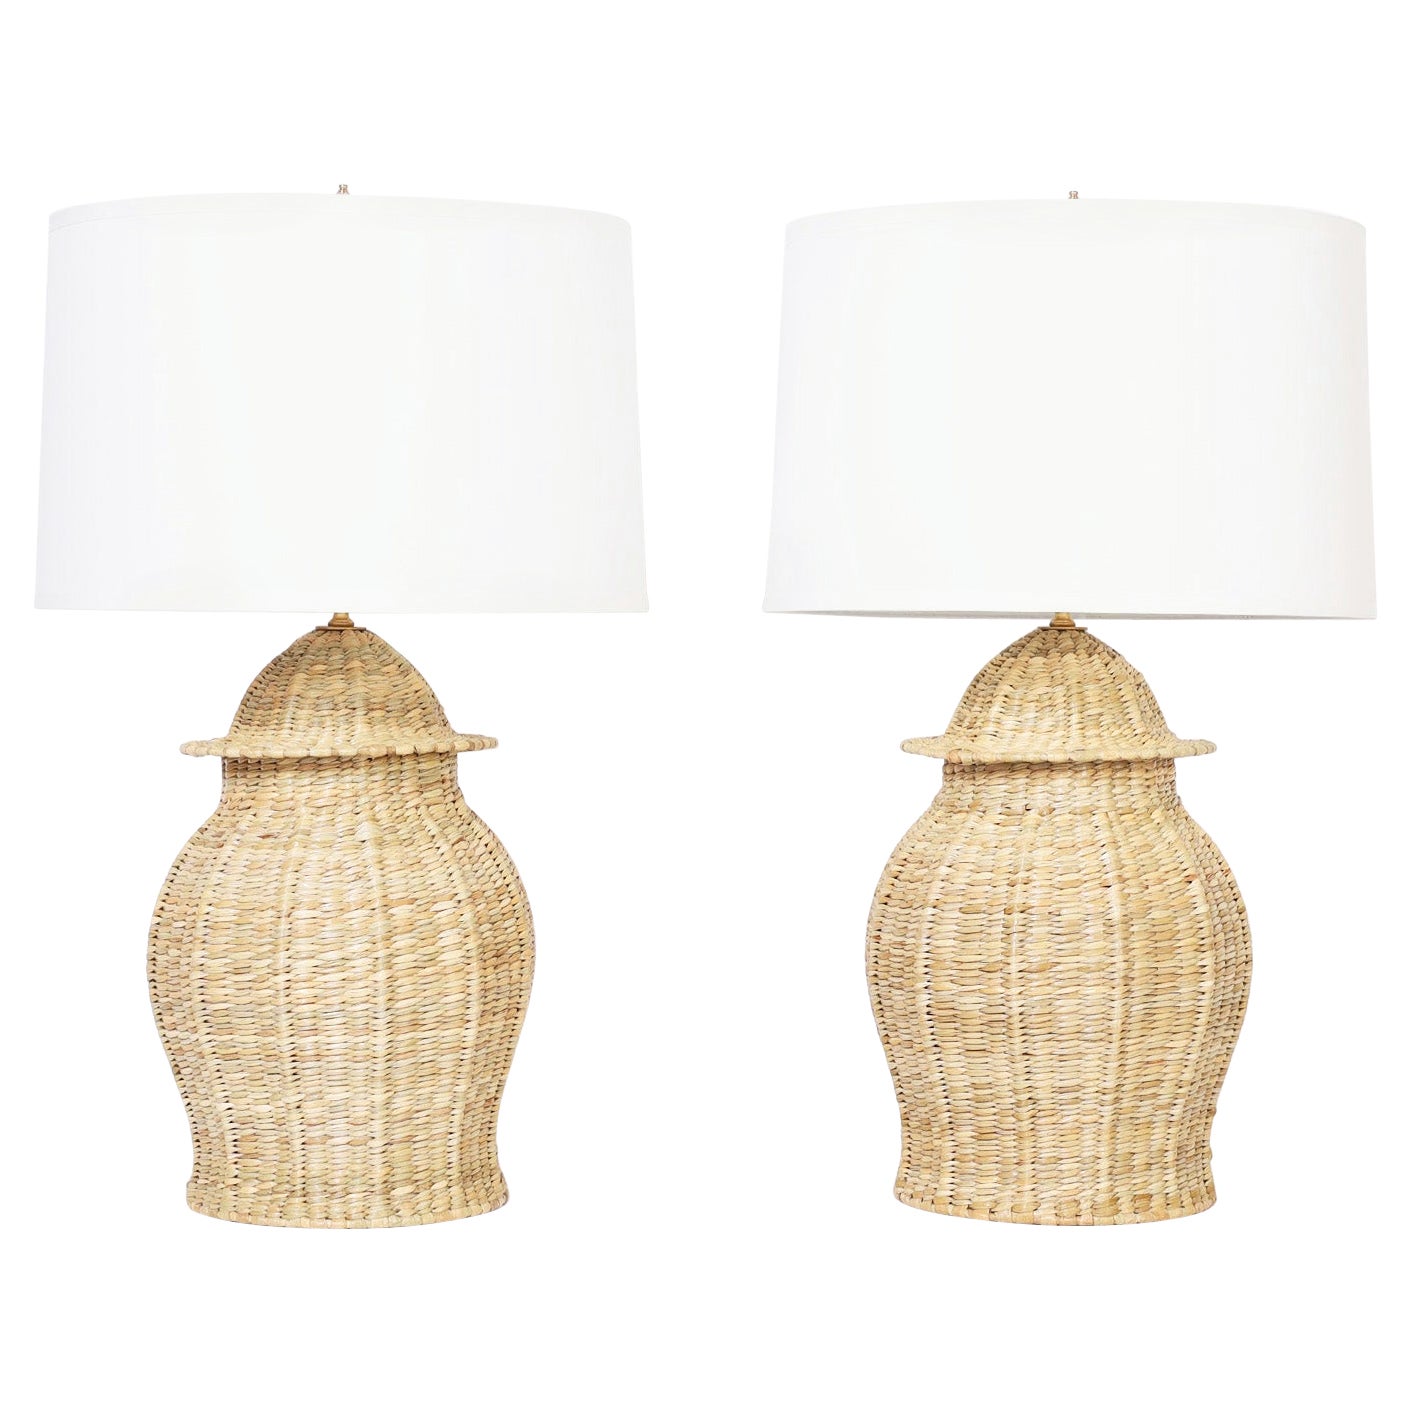 Pair of Wicker Ginger Jar Form Table Lamps from the FS Flores Collection For Sale